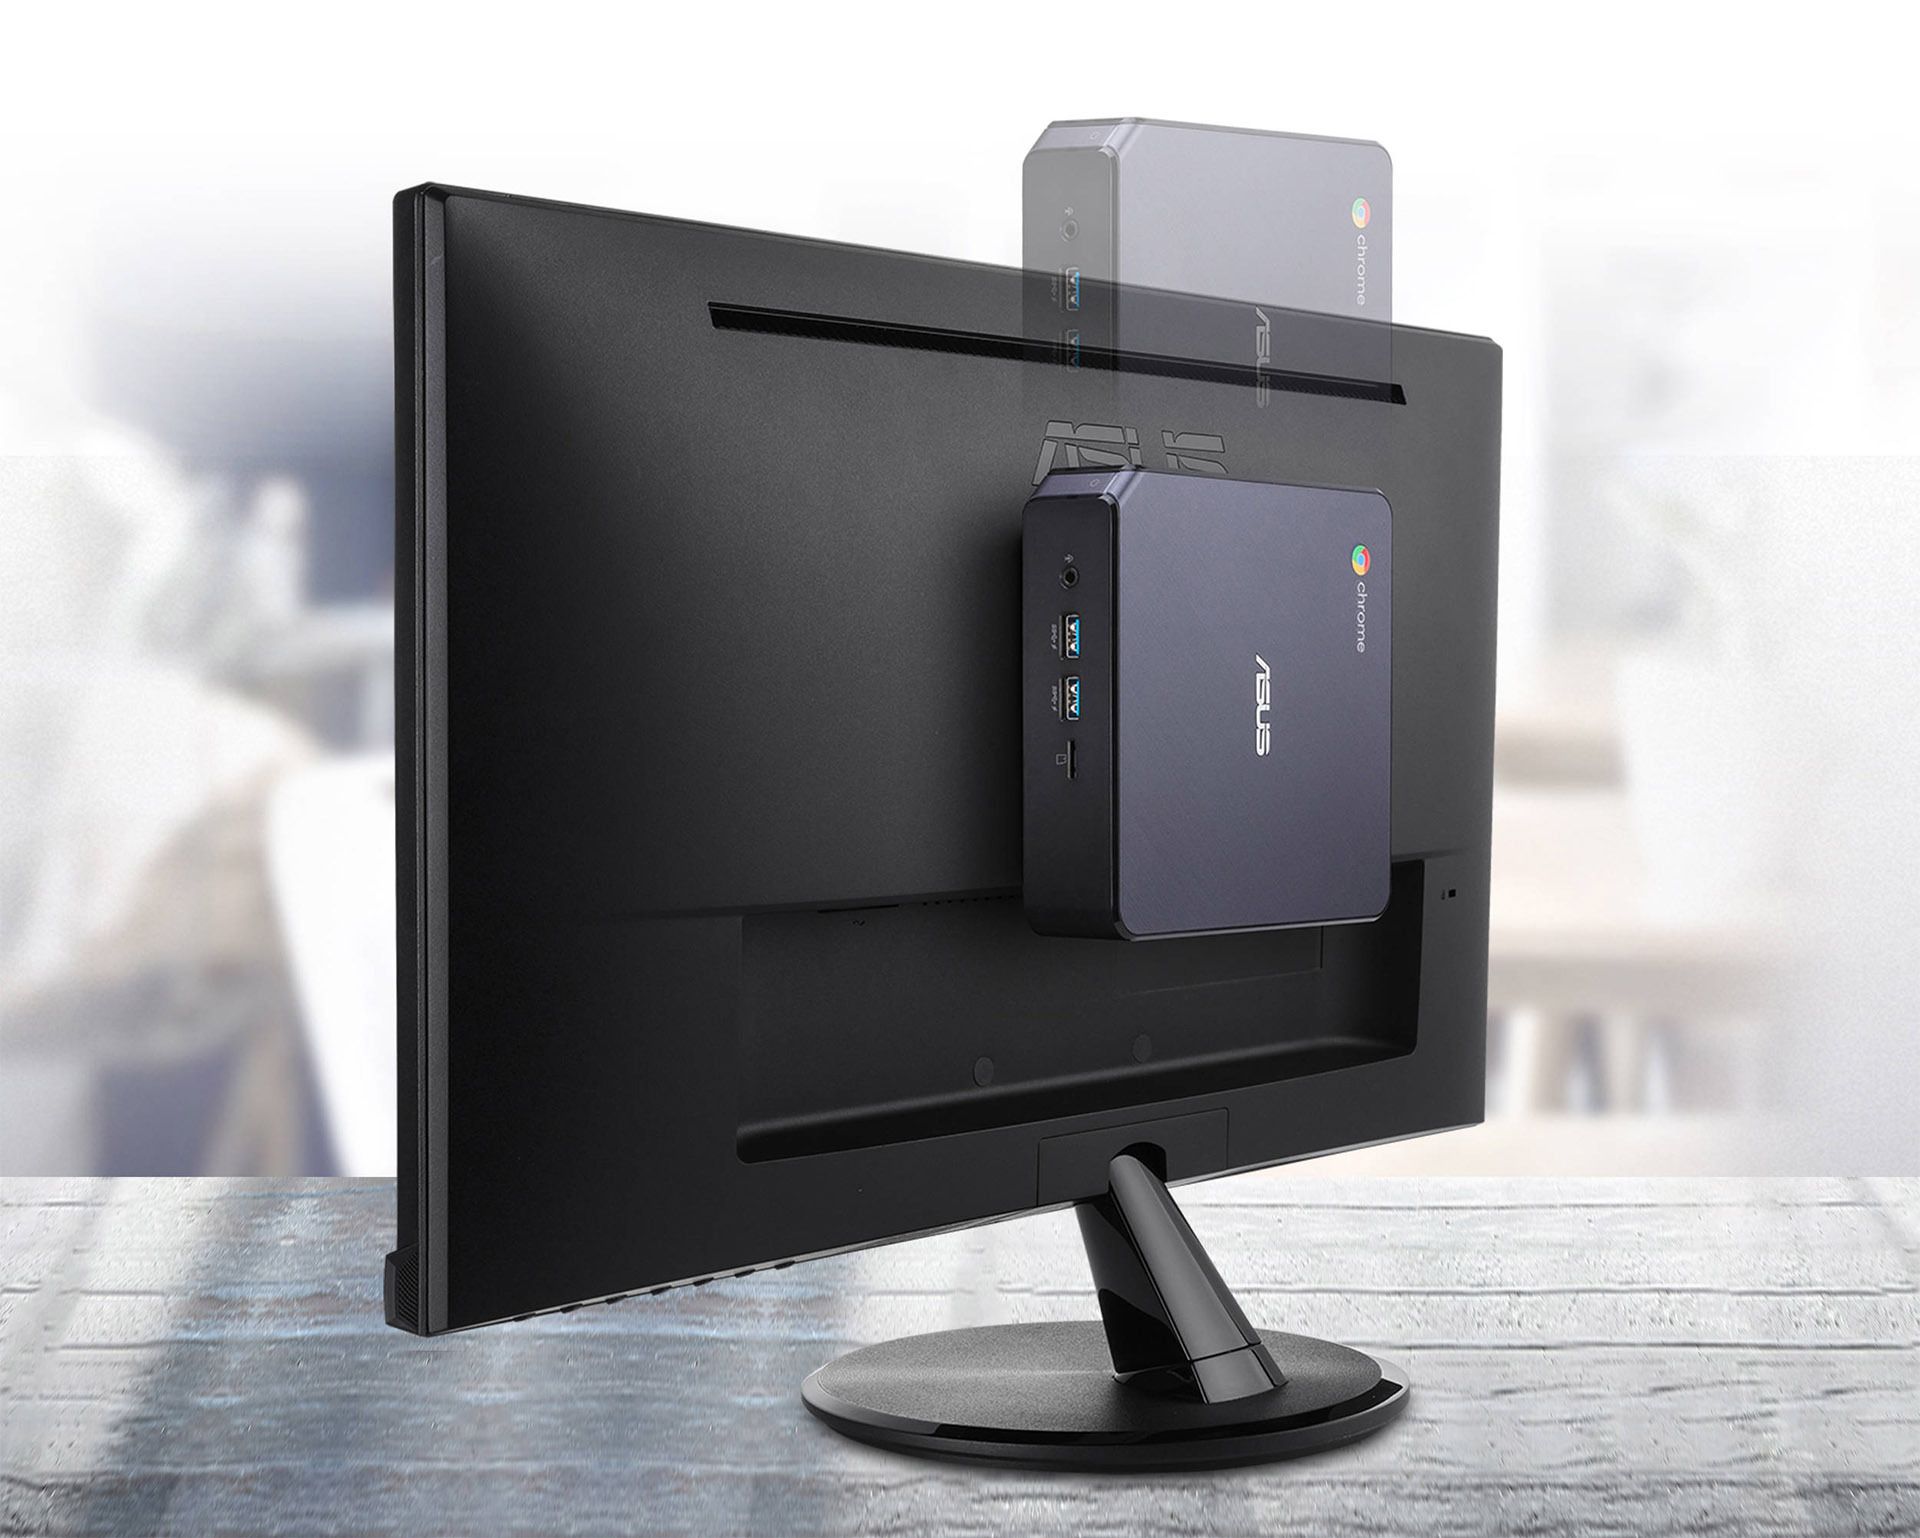 Showing the Chromebox 4's vesa mount on a monitor